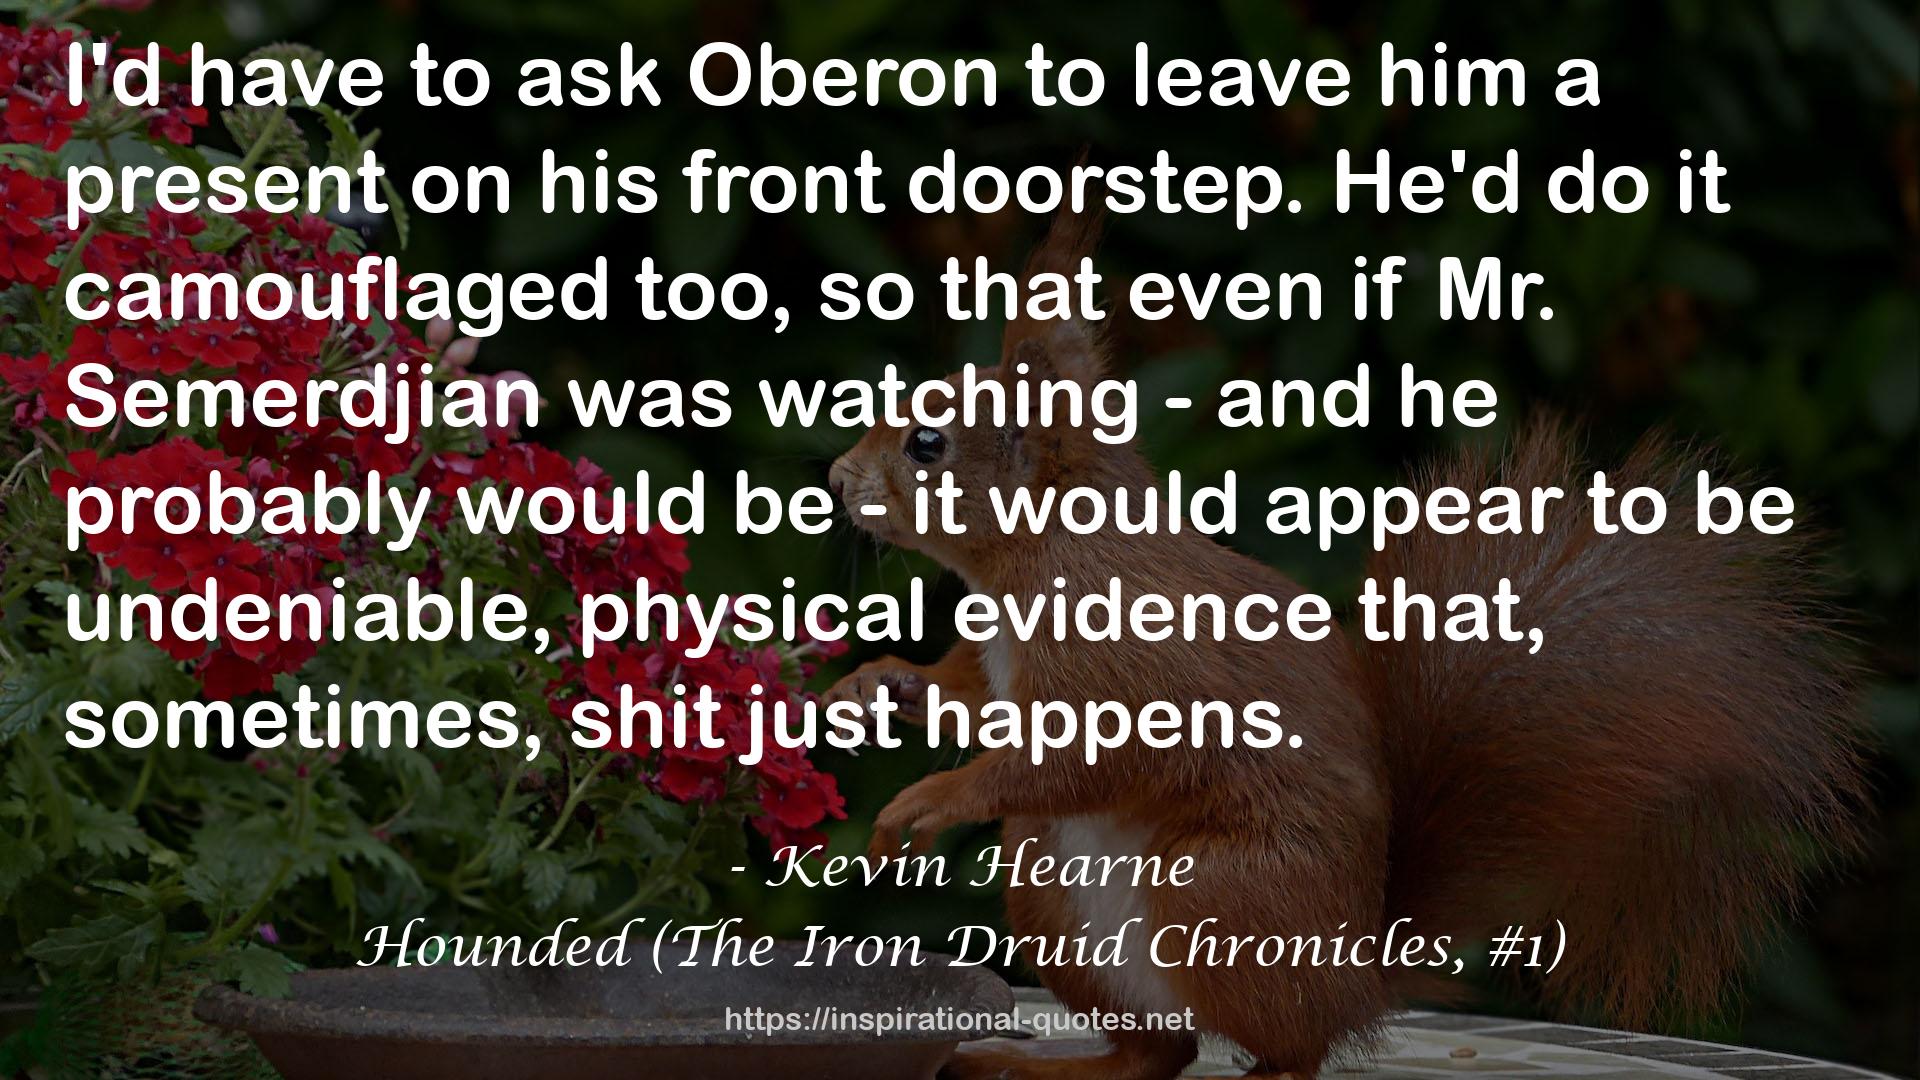 Hounded (The Iron Druid Chronicles, #1) QUOTES